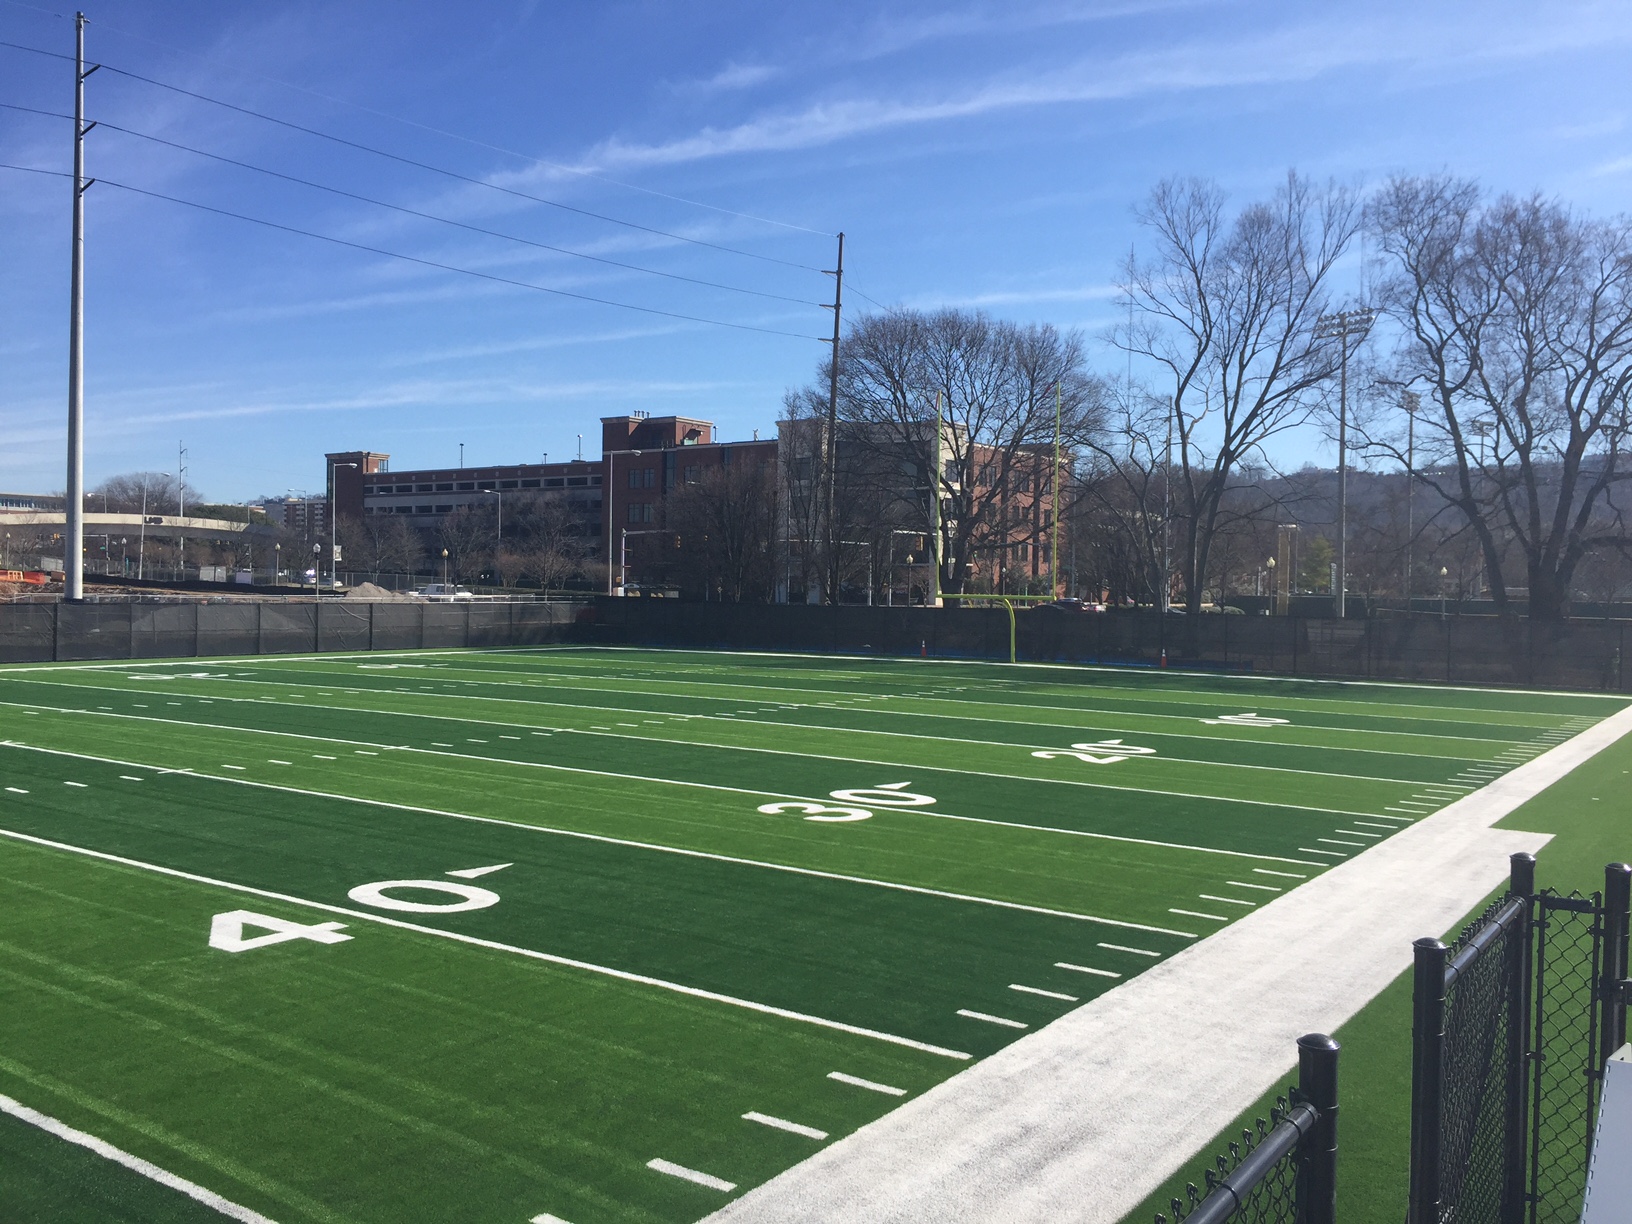 One of the practice fields at UAB, built with Matrix turf with Helix technology by Hellas Construction.